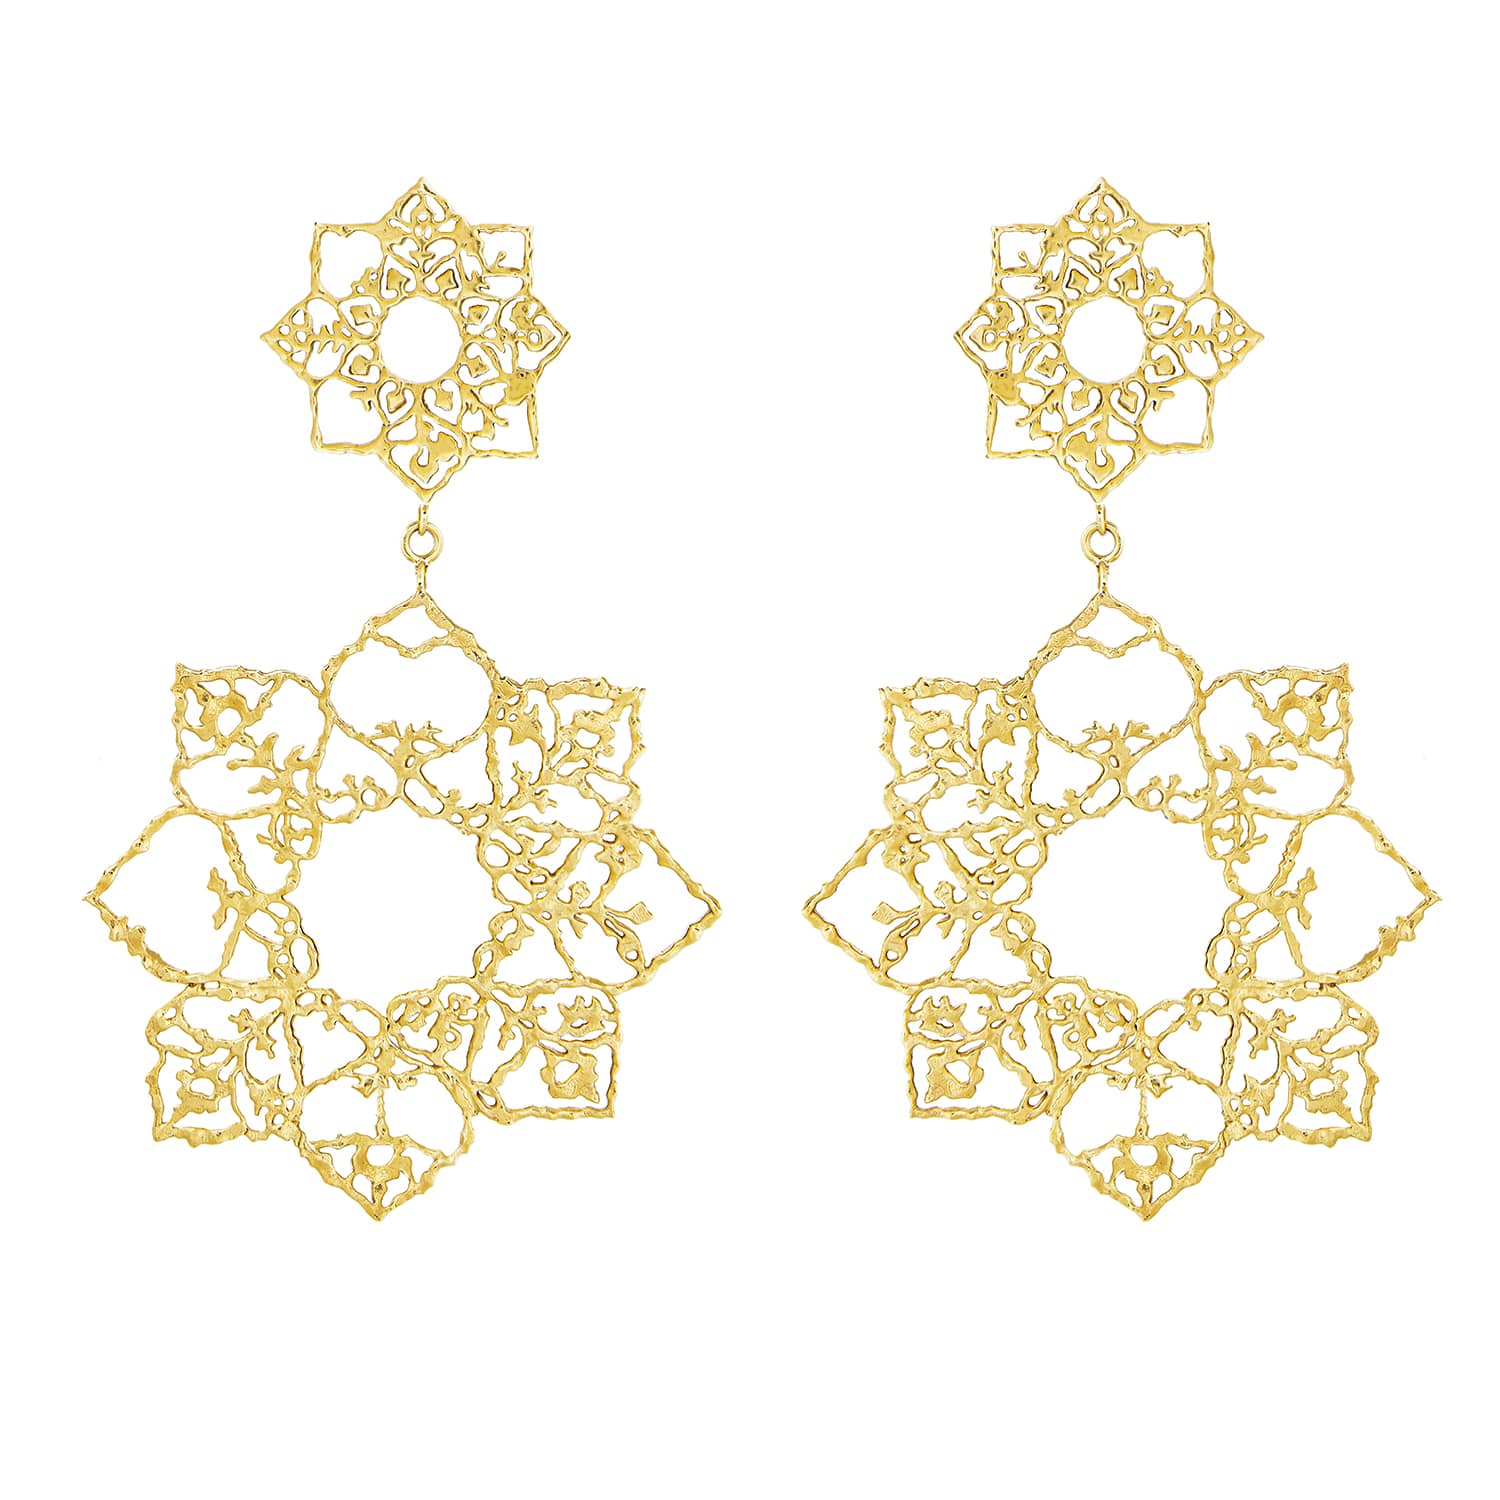 Natalie Perry Jewellery, Two Blooms Gold Statement Earrings 18ct